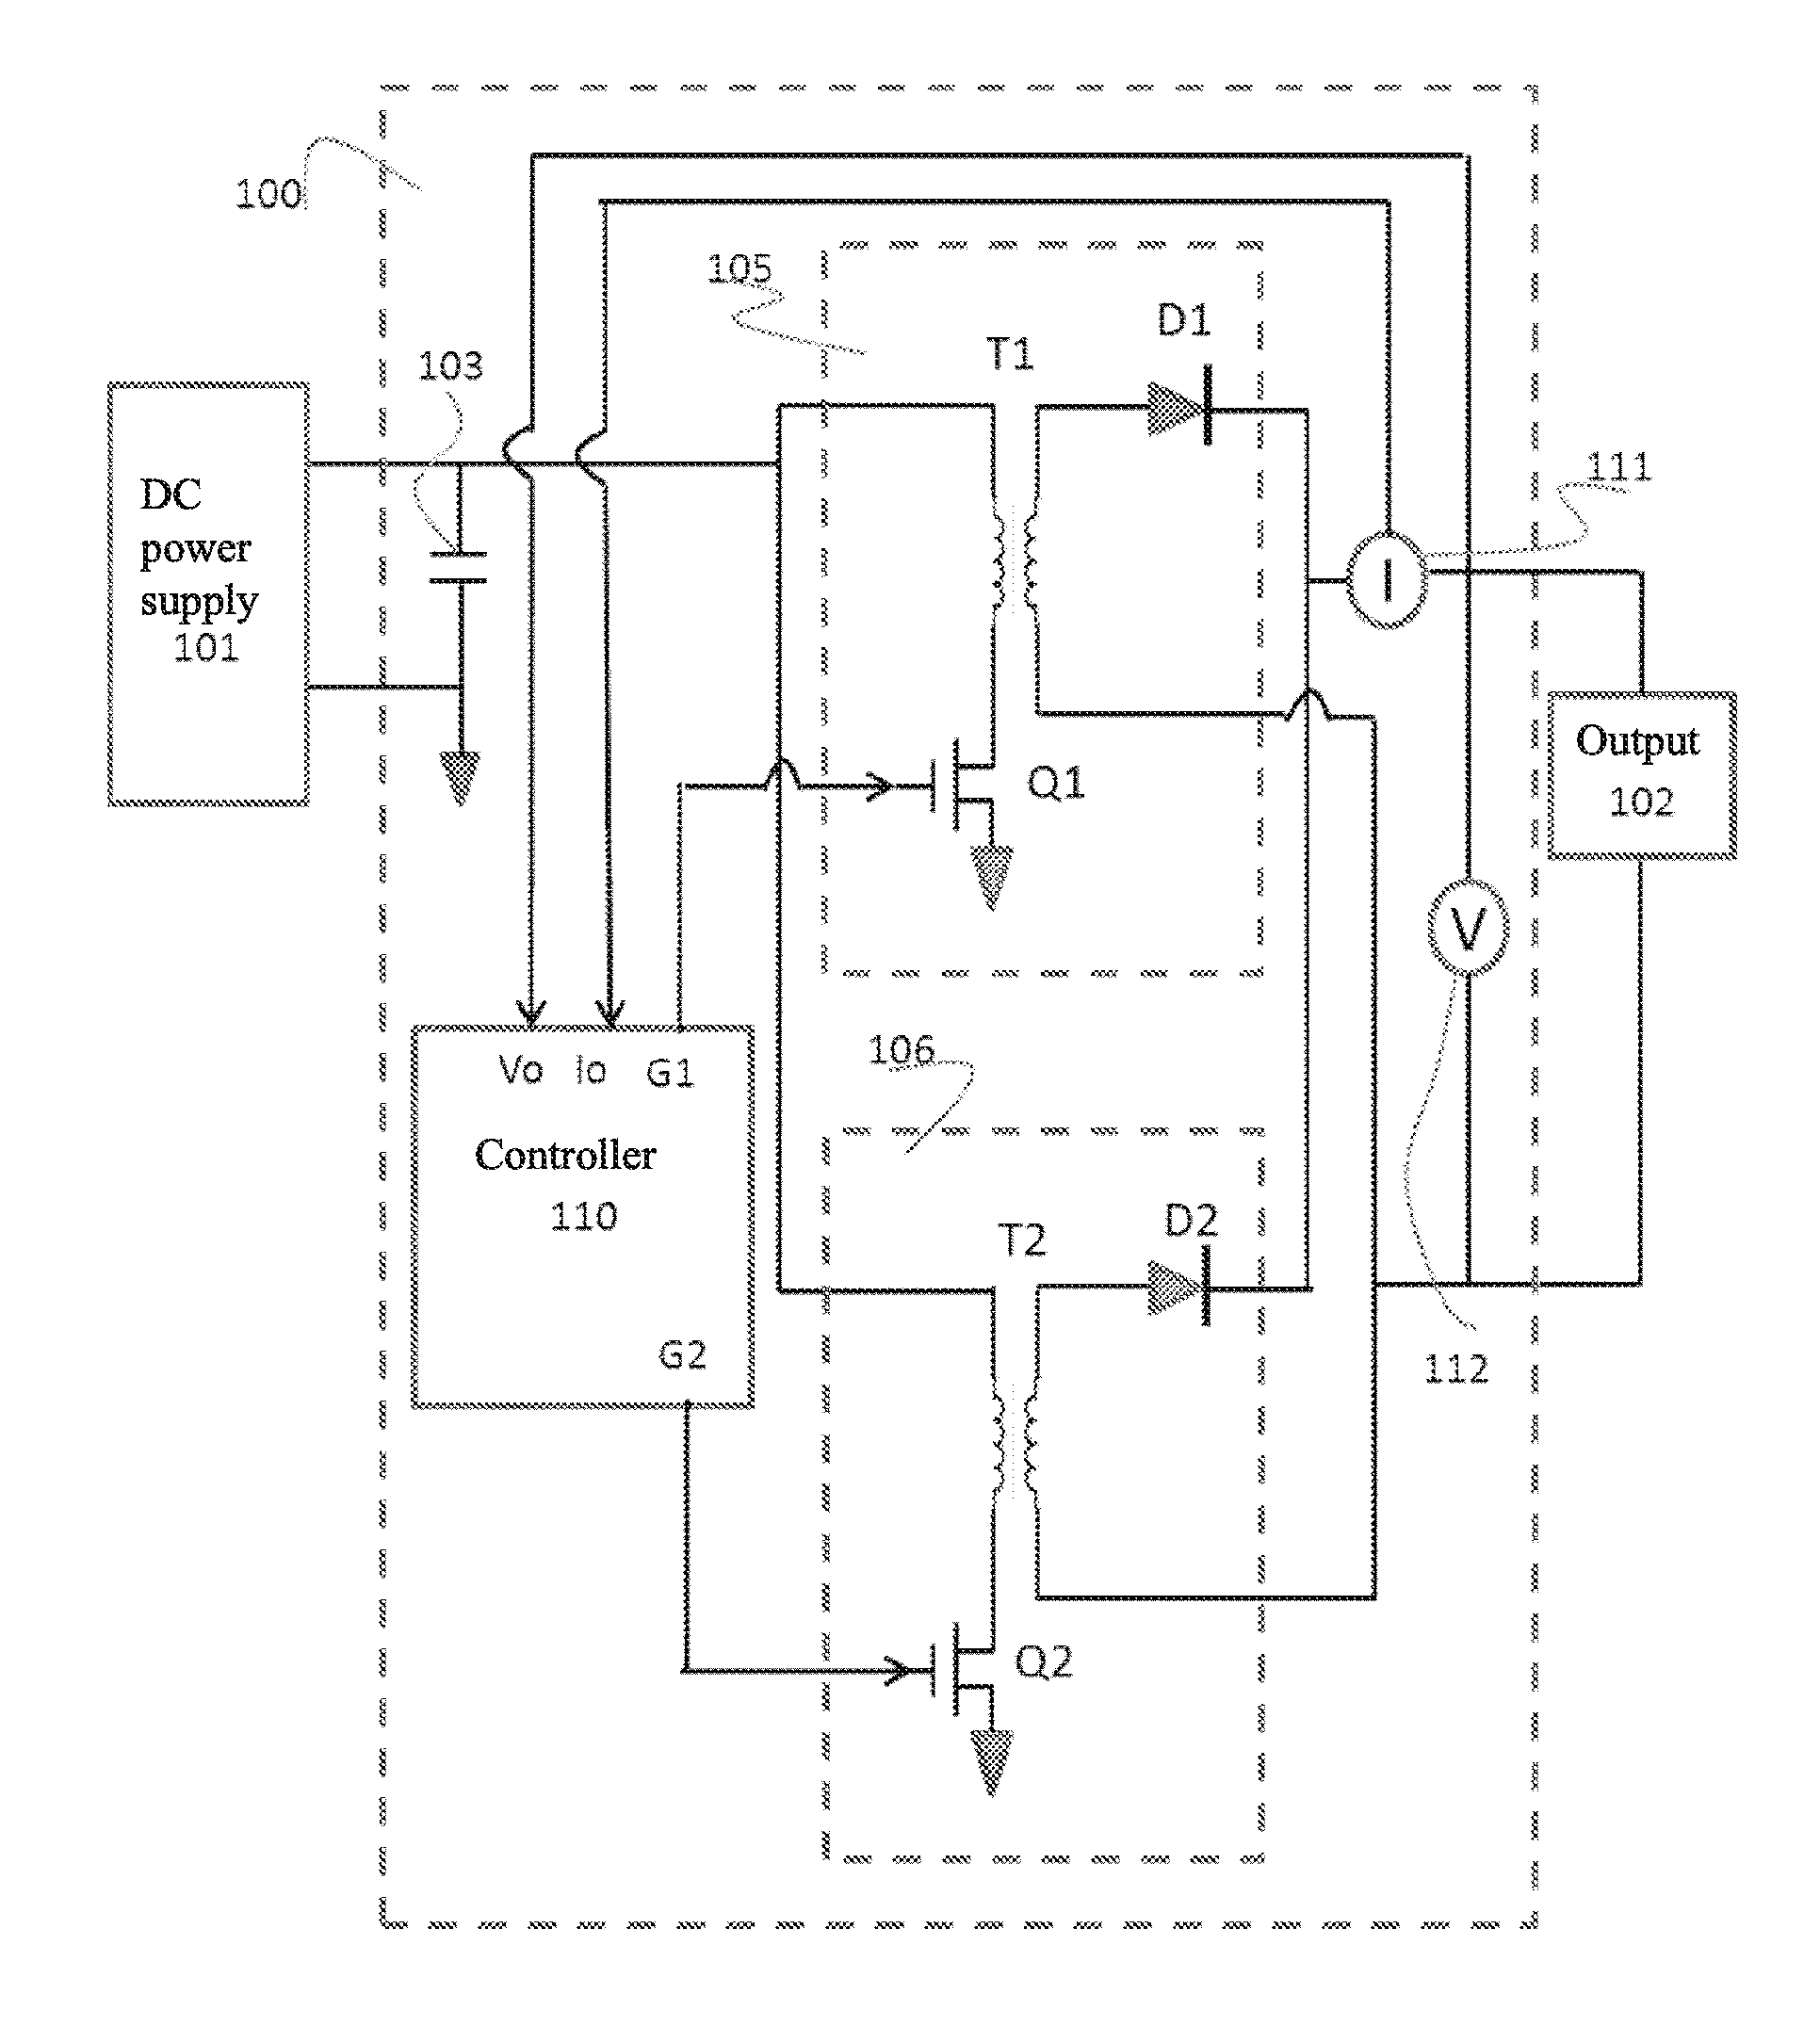 Alternating Parallel Fly Back Converter with Alternated Master-Slave Branch Circuits